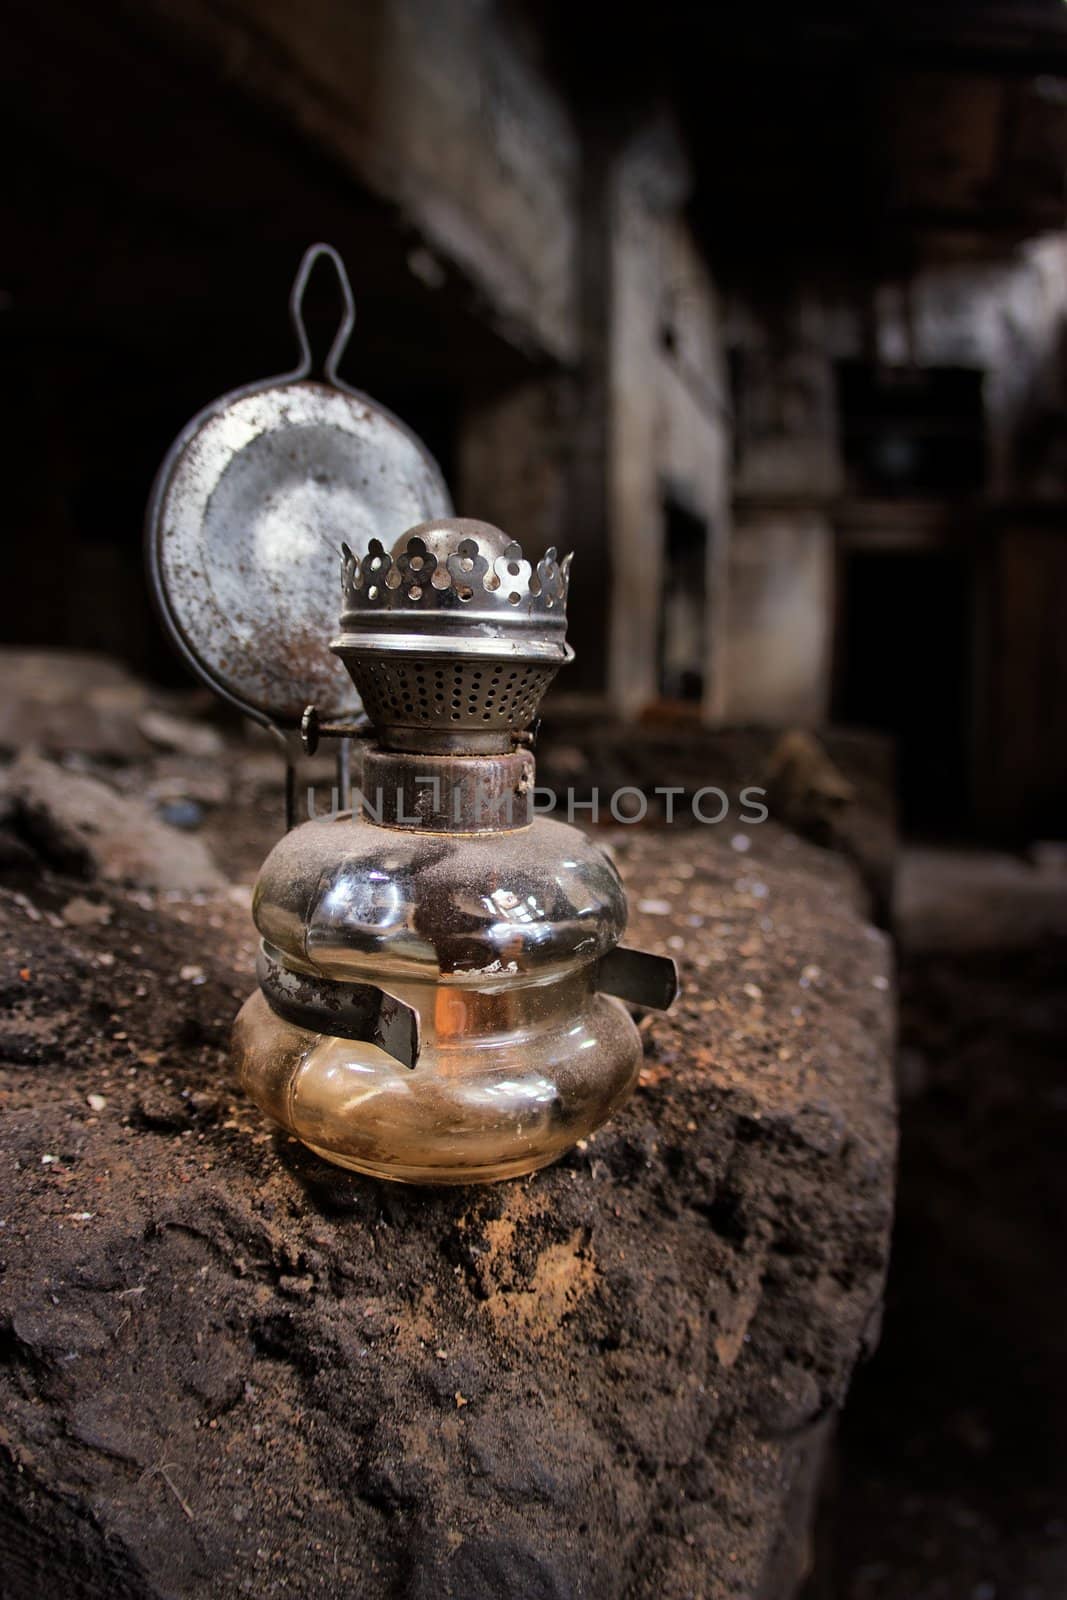 Old kerosene lamp in an abandoned, gloomy, creepy building of an old factory